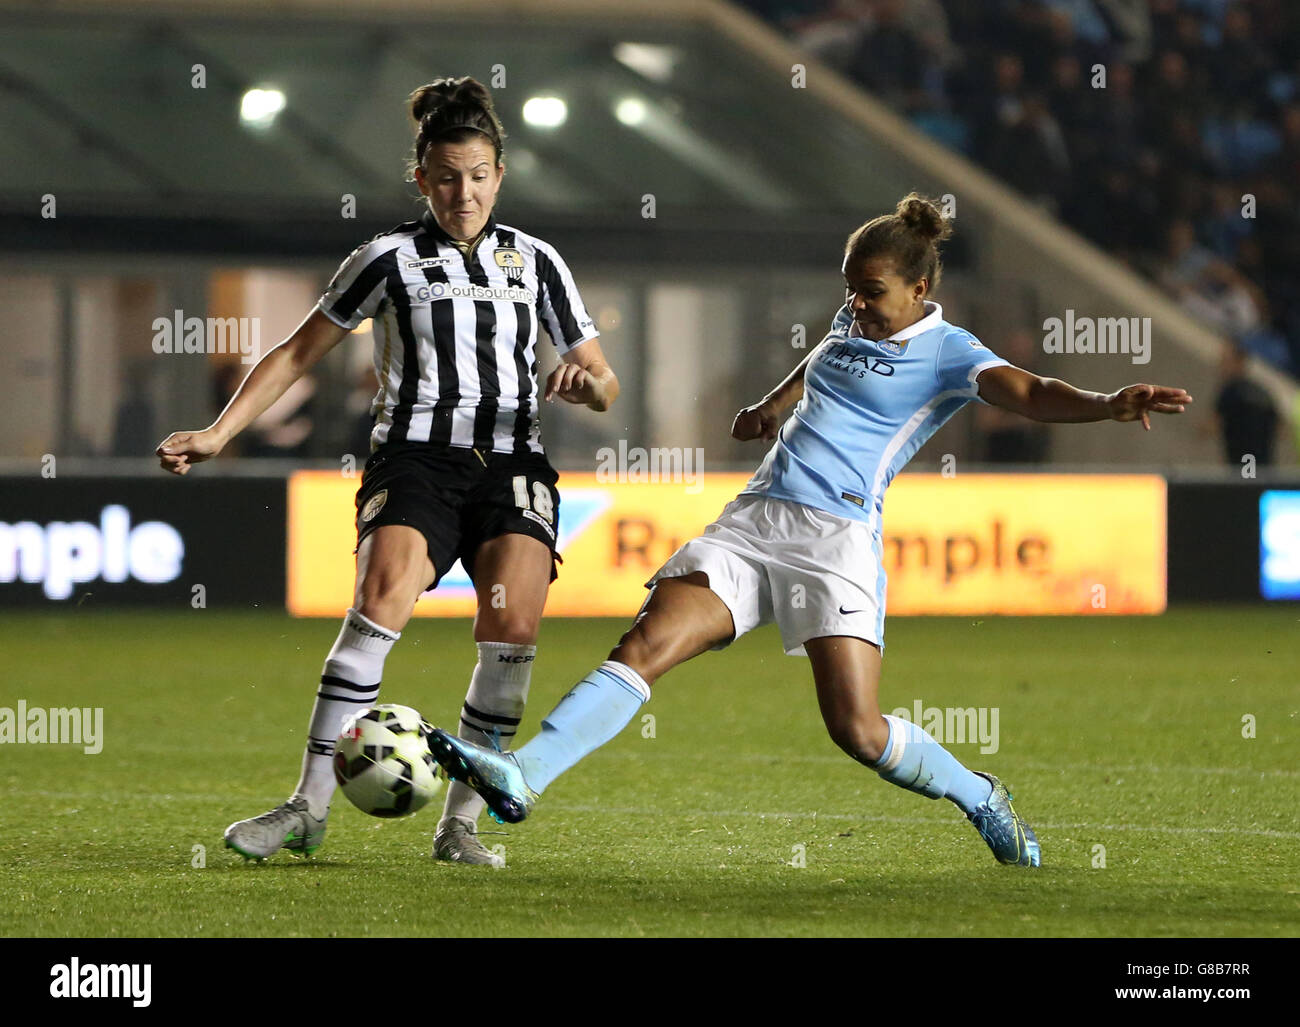 Manchester City Ladies' Nikita Parris (right) and Notts County Ladies' Leanne Chrichton battle for the ball during the Women's Super League match at the Academy Stadium, Manchester. Stock Photo